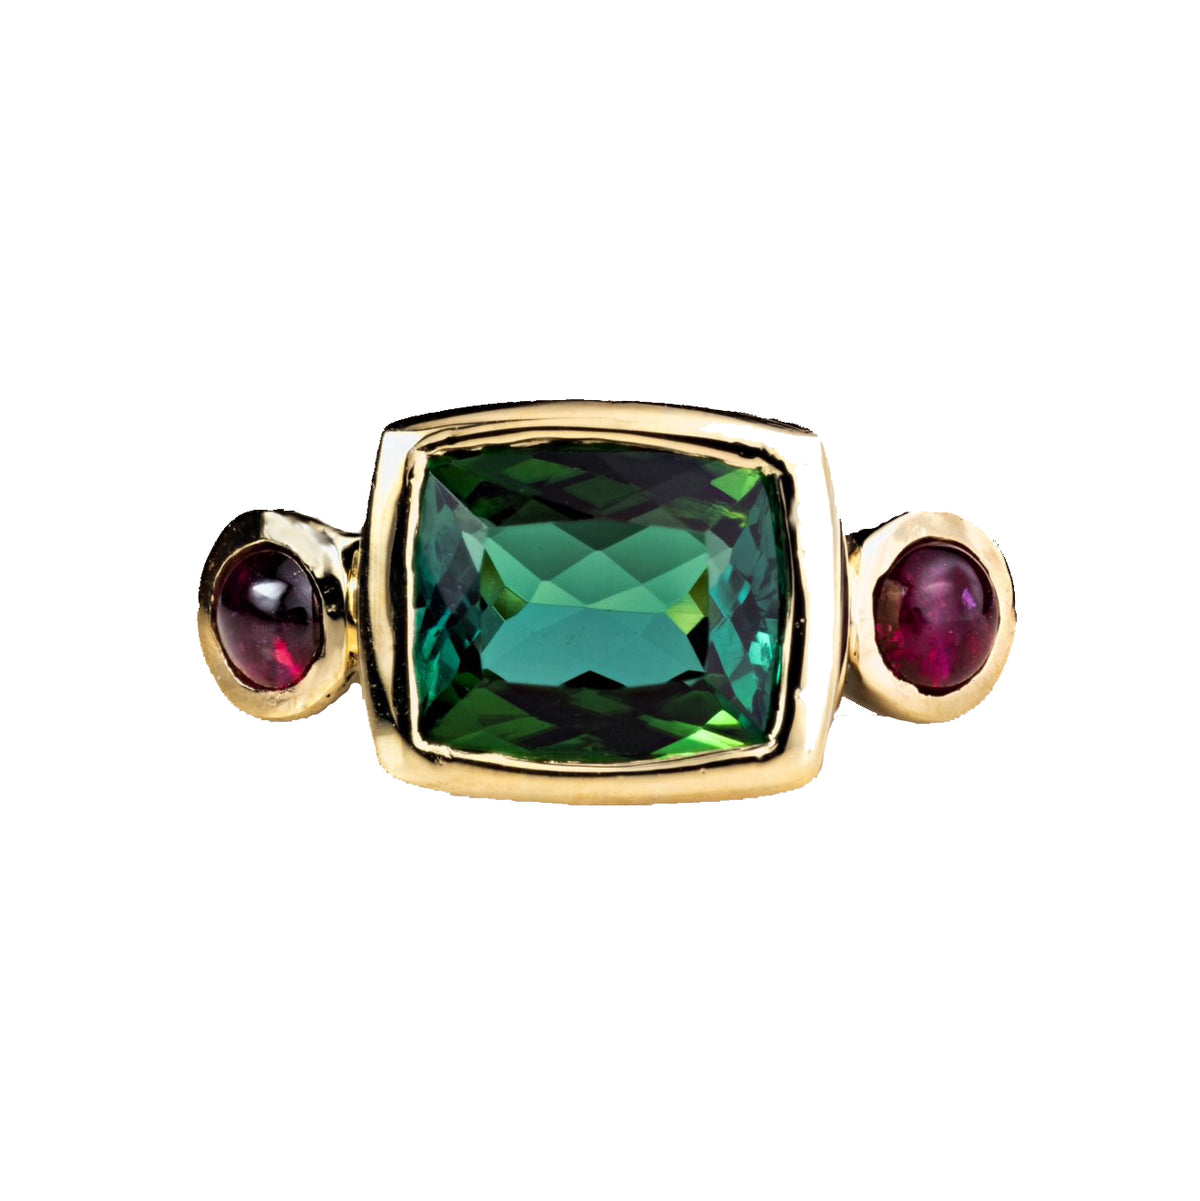 Watermelon moon ring | Camille Carnevale